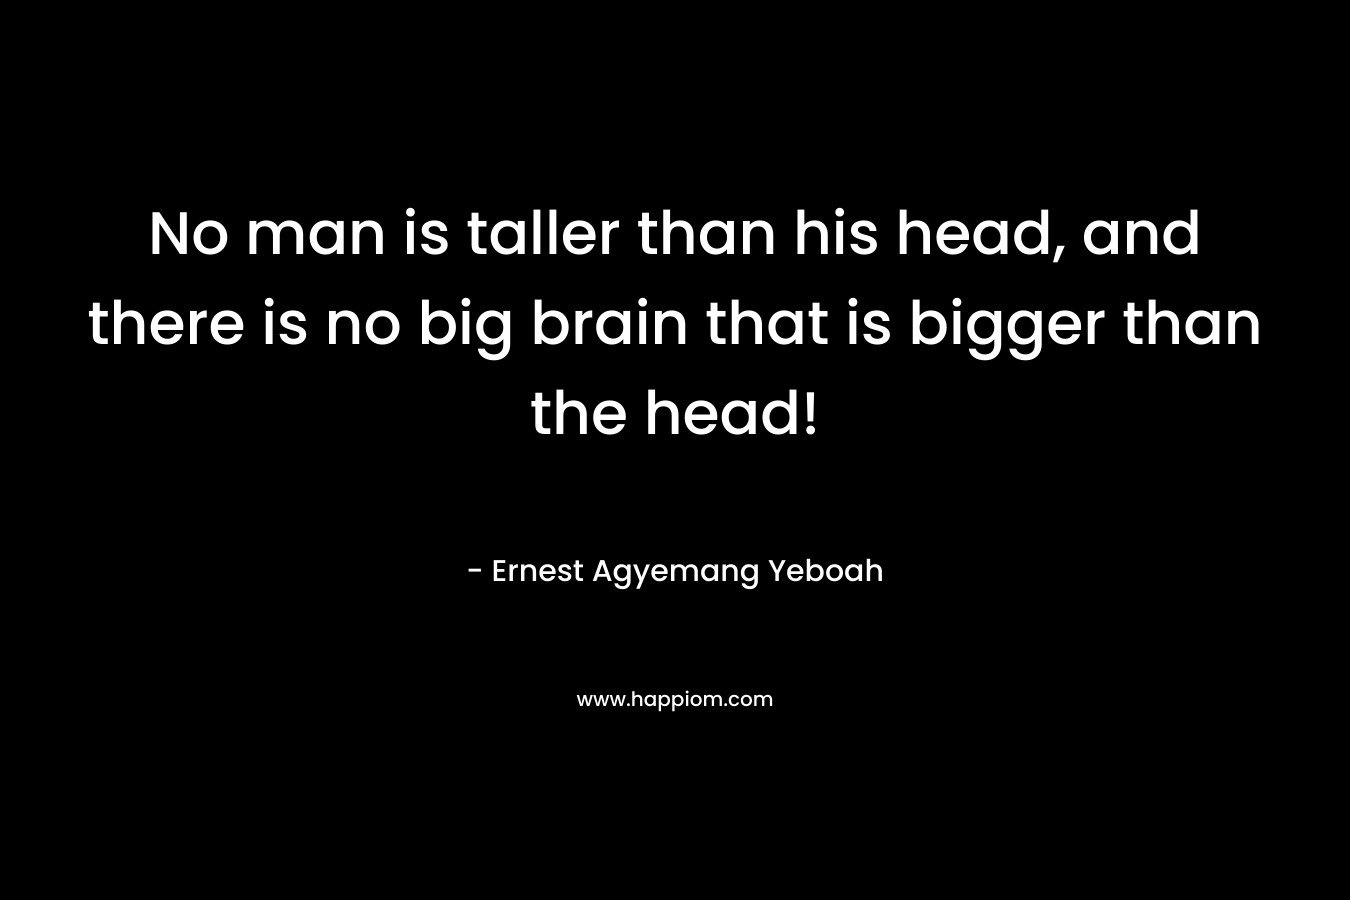 No man is taller than his head, and there is no big brain that is bigger than the head!